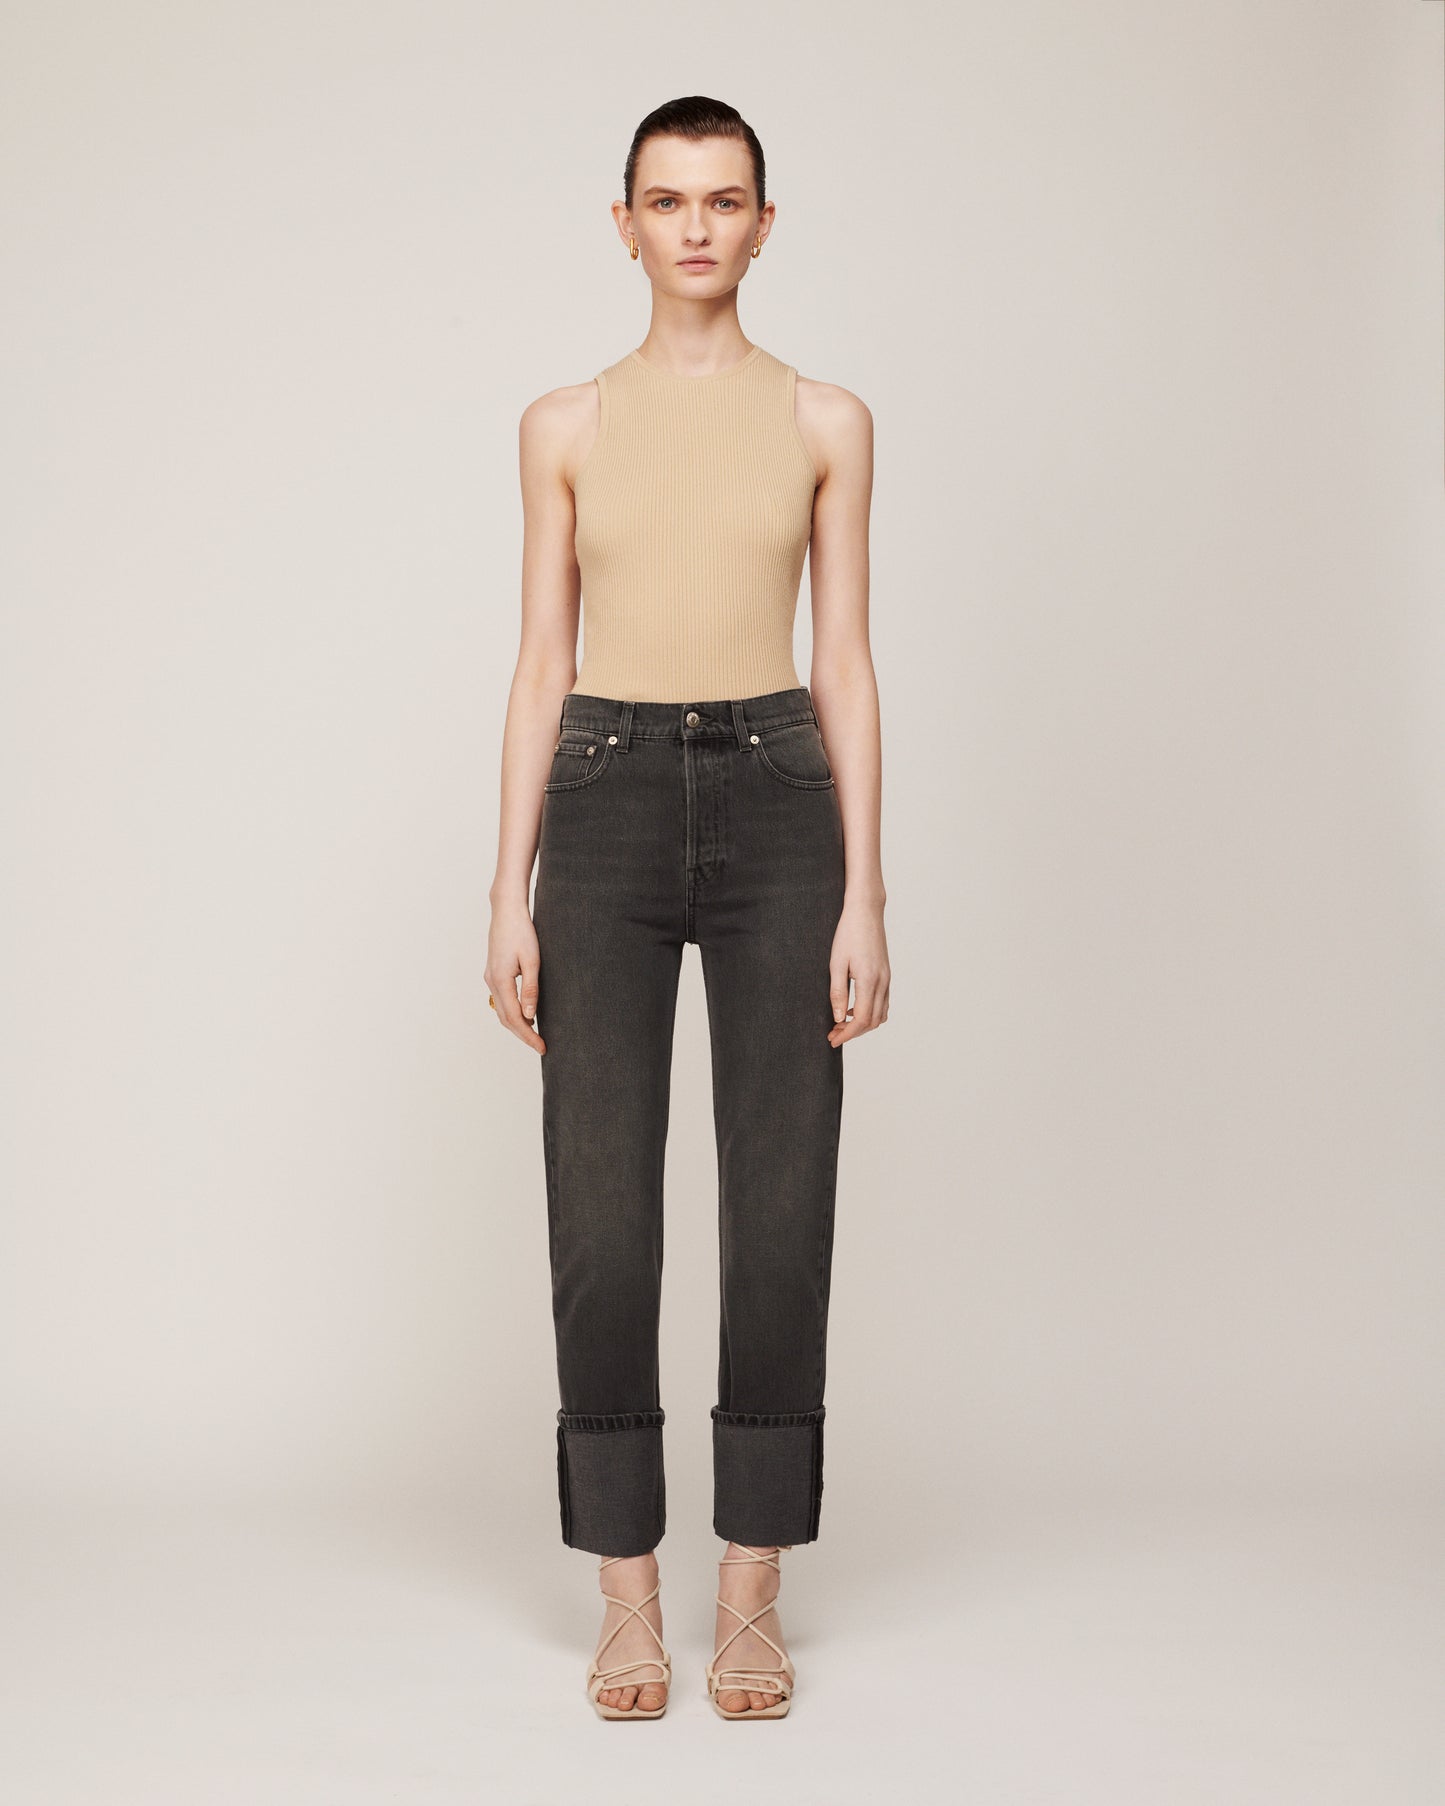 Cho - Straight Leg Jeans - Washed Grey